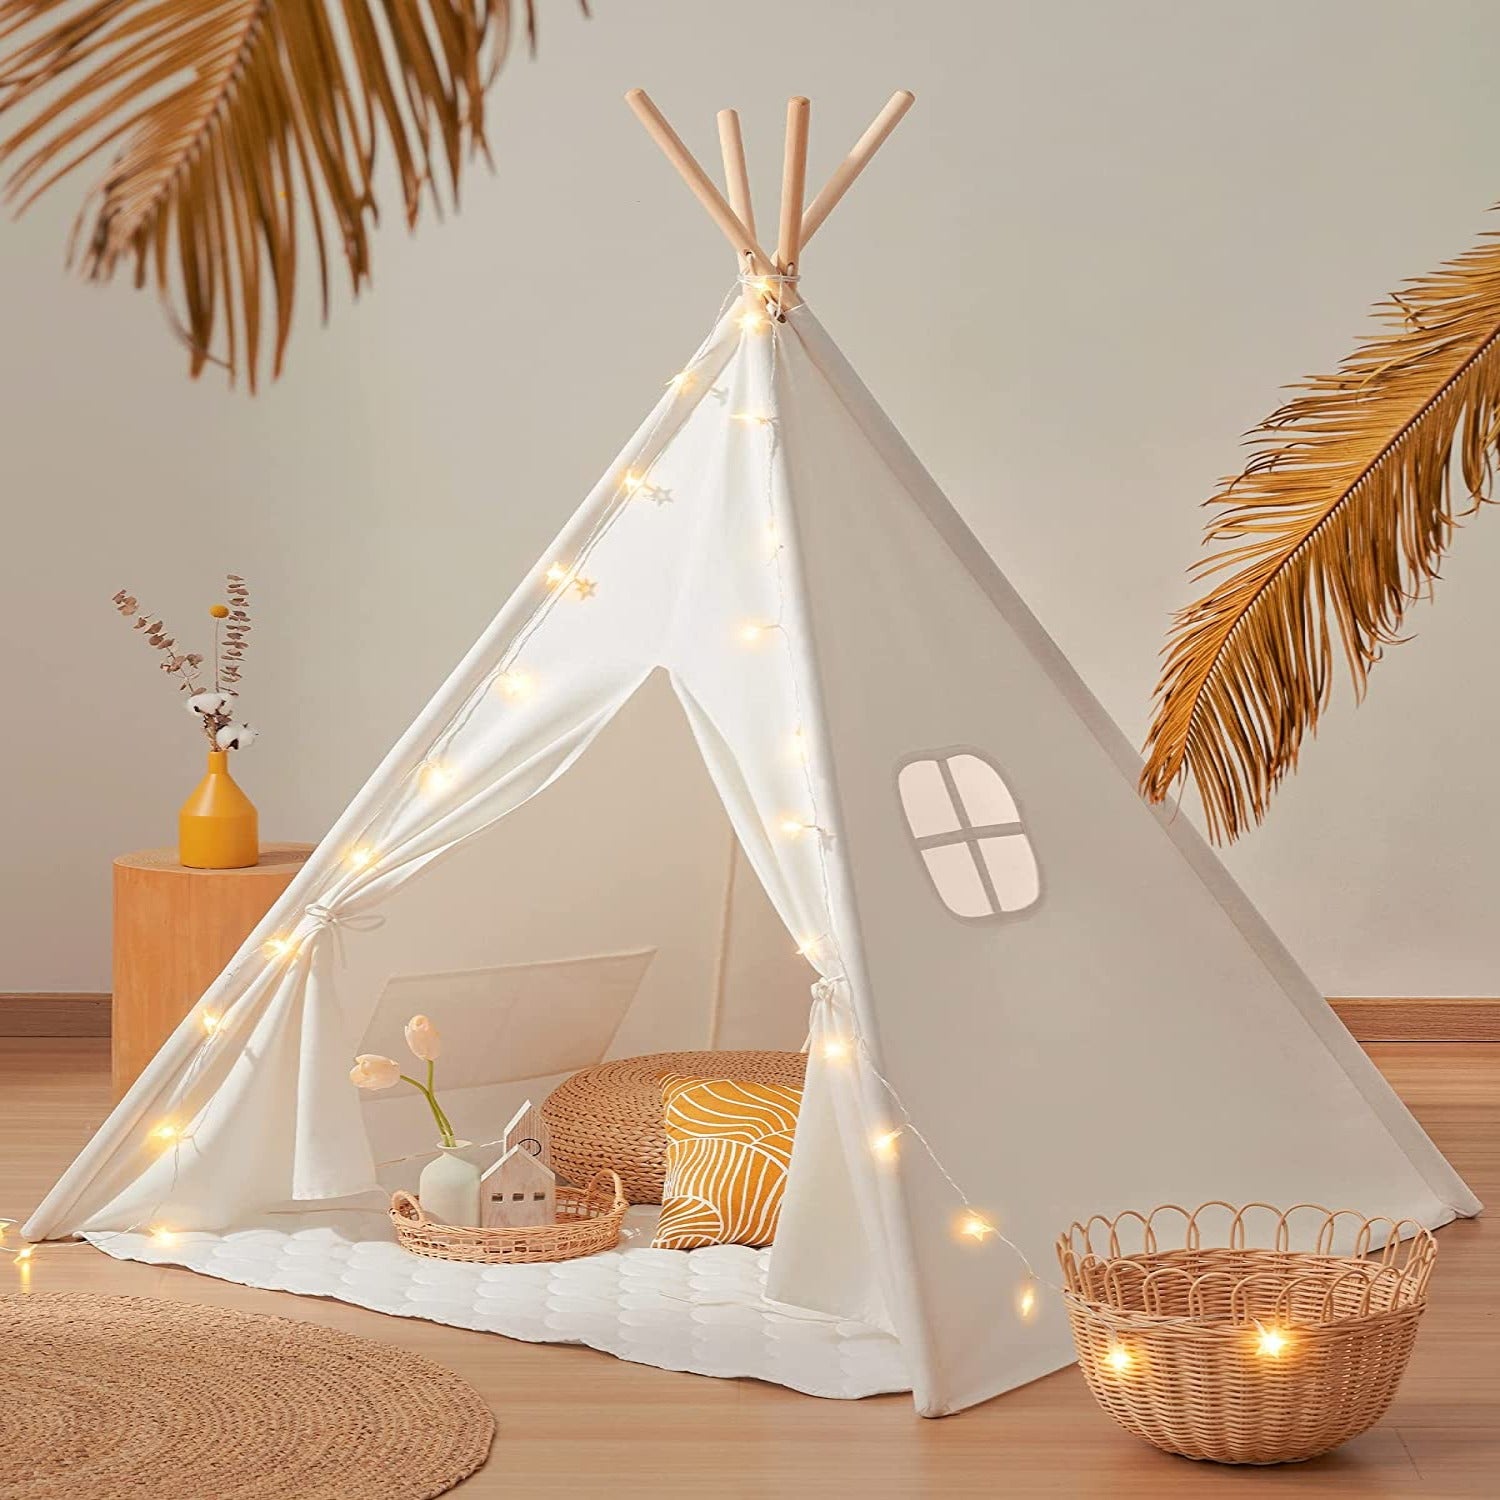 Children's Bamboo Play Tent Kids Teepee for Indoor Outdoor Camping With Fairy Lights